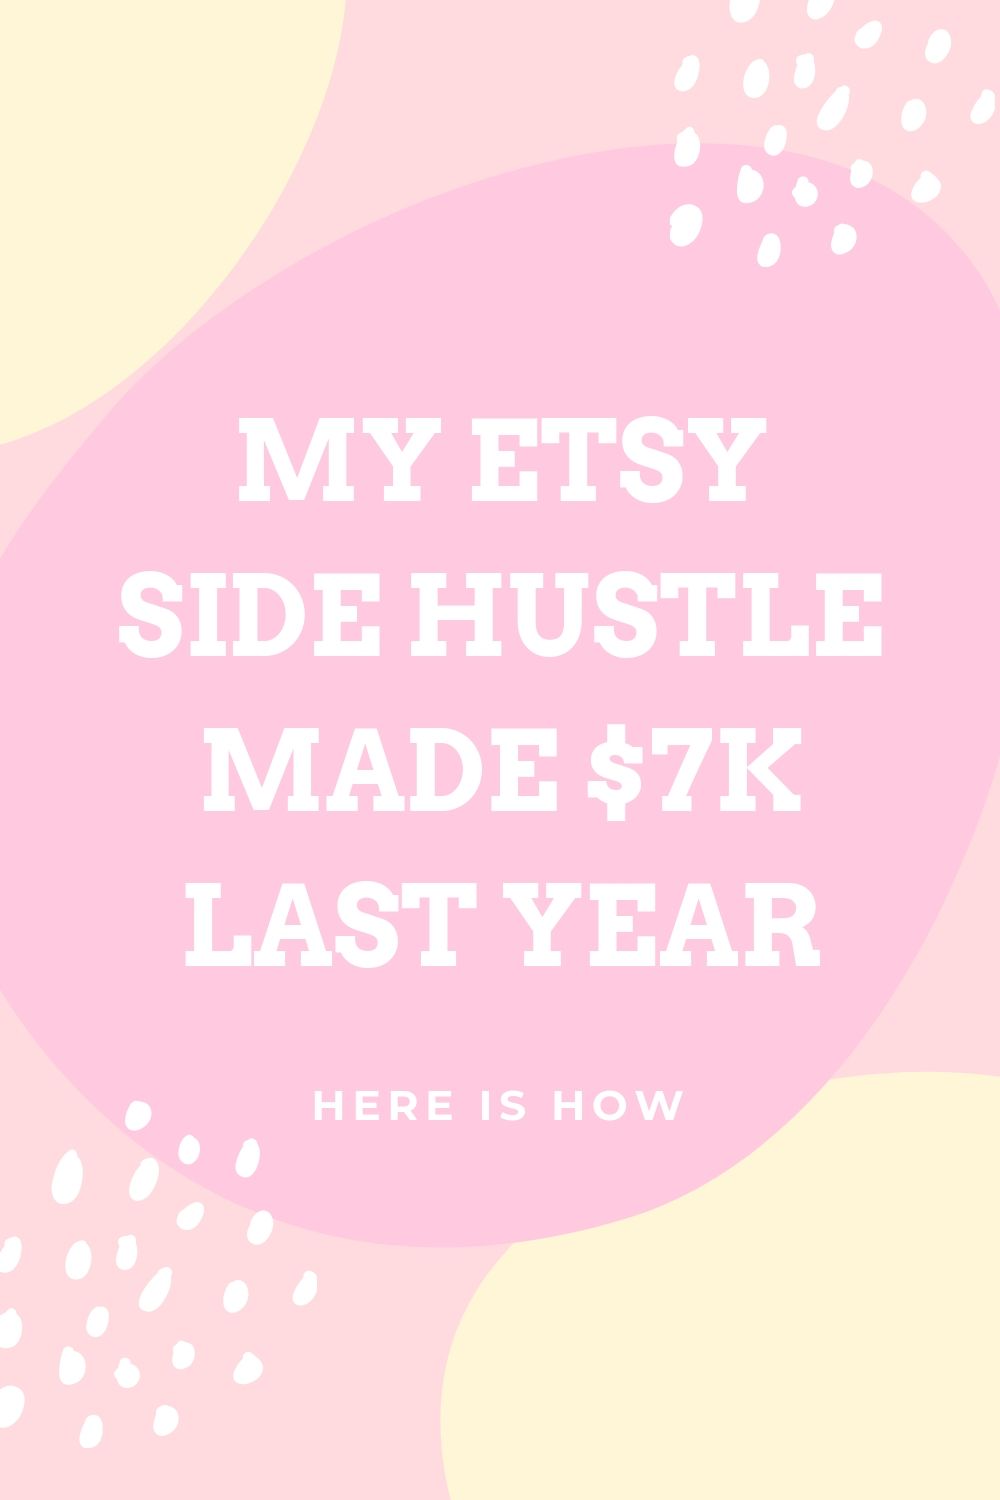 How to sell printables on Etsy to make passive income